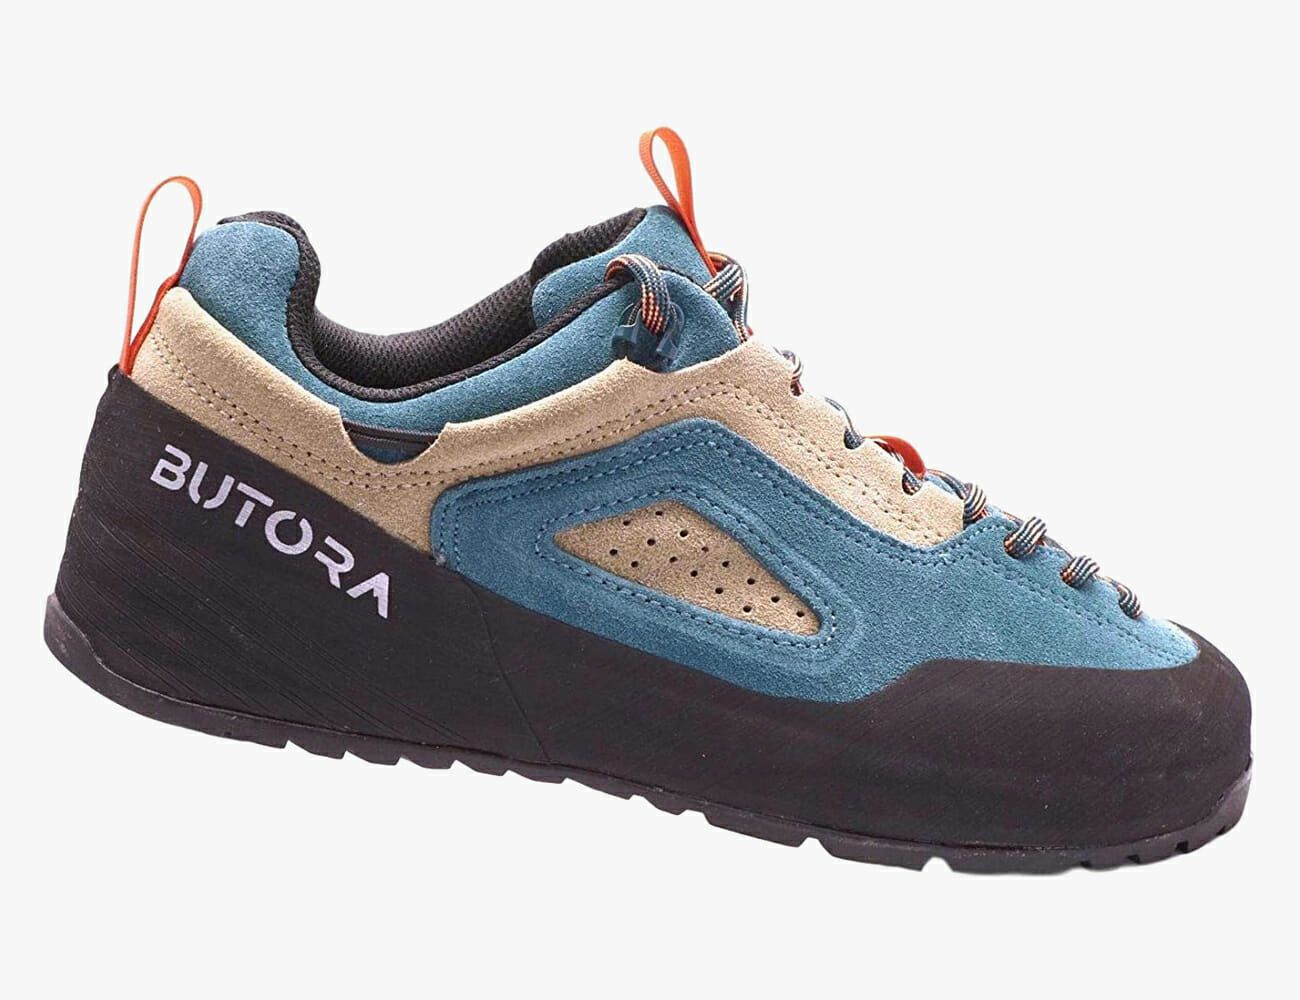 These 9 Technical Shoes Are Secretly 